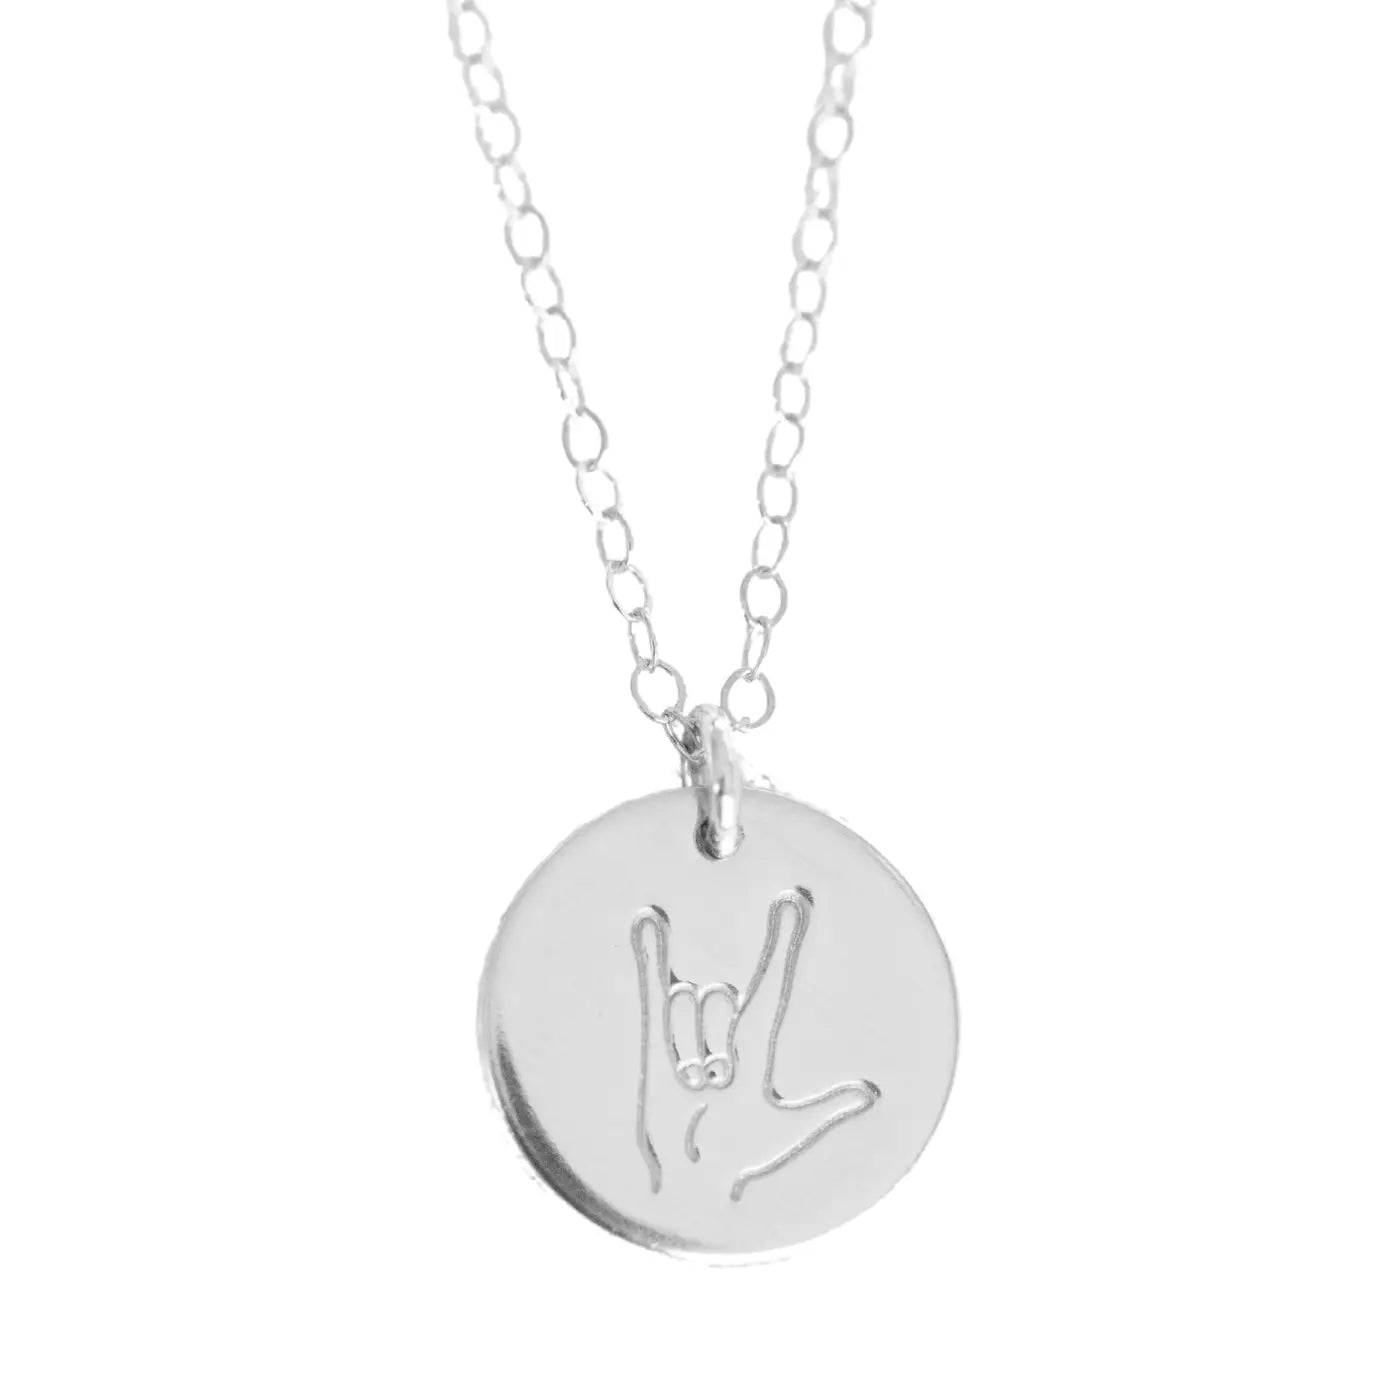 Hand Stamped Disc Necklace - Sign Language 'i Love You'